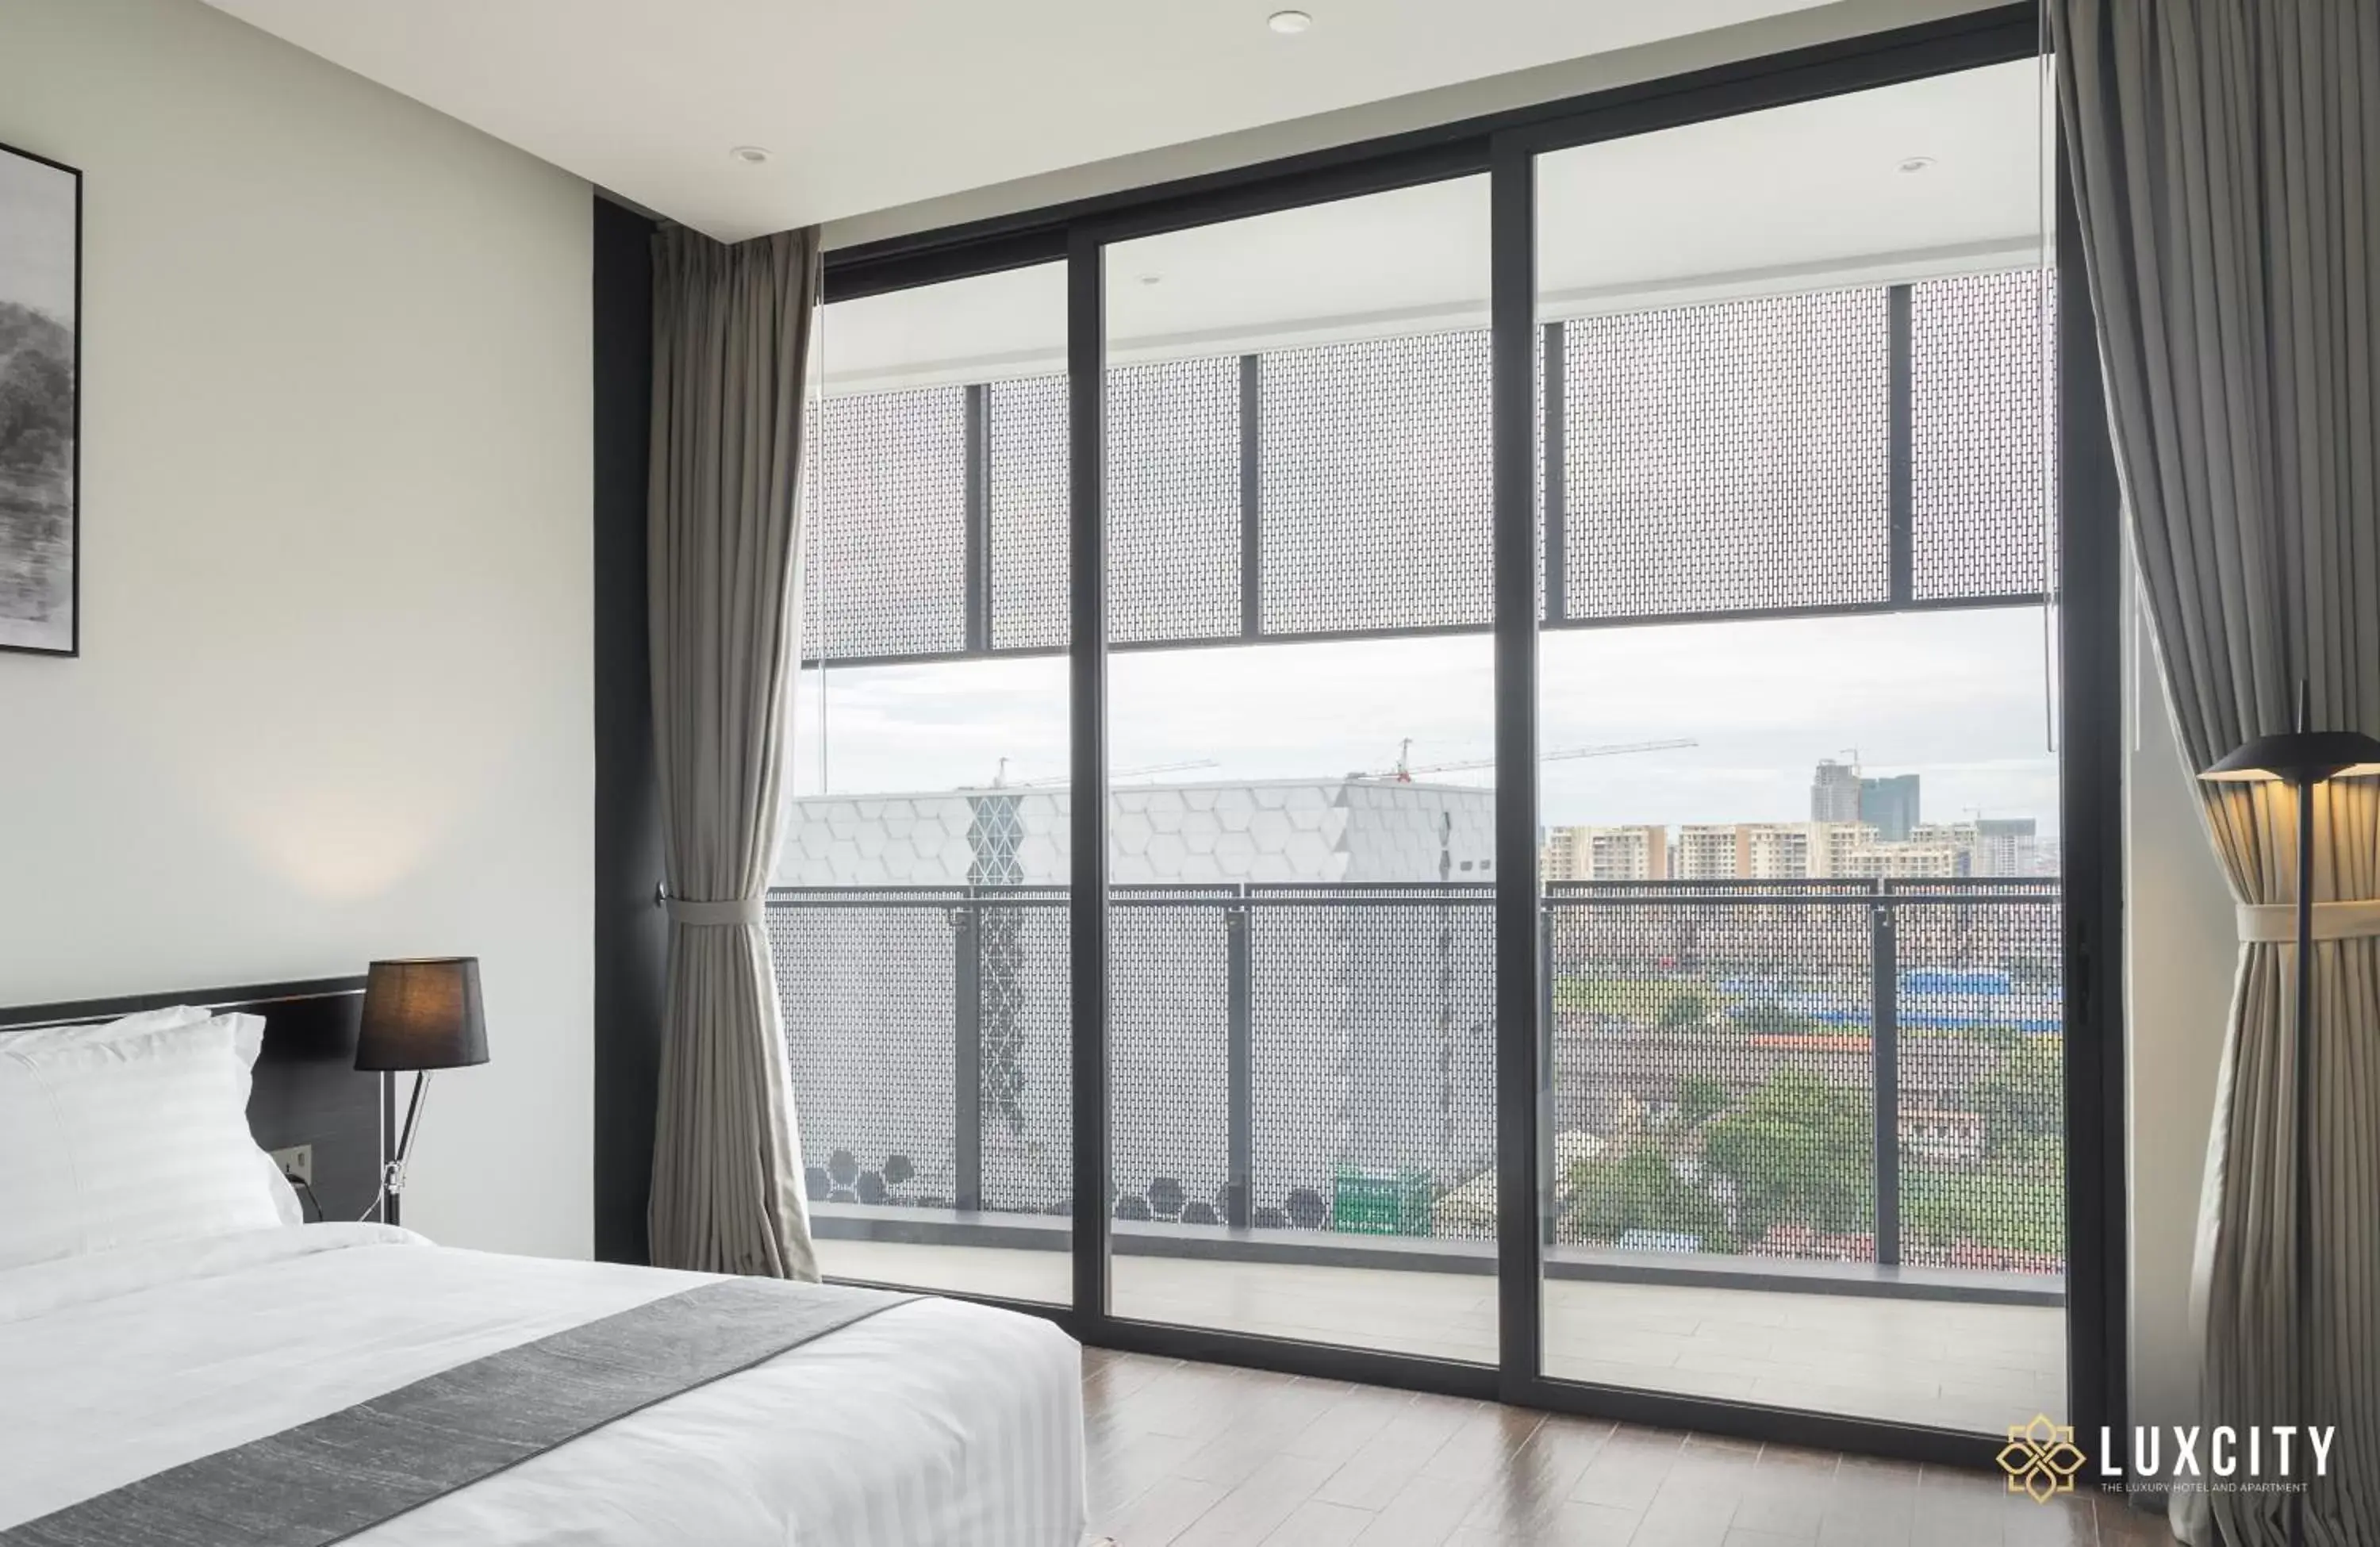 City view in Luxcity Hotel & Apartment